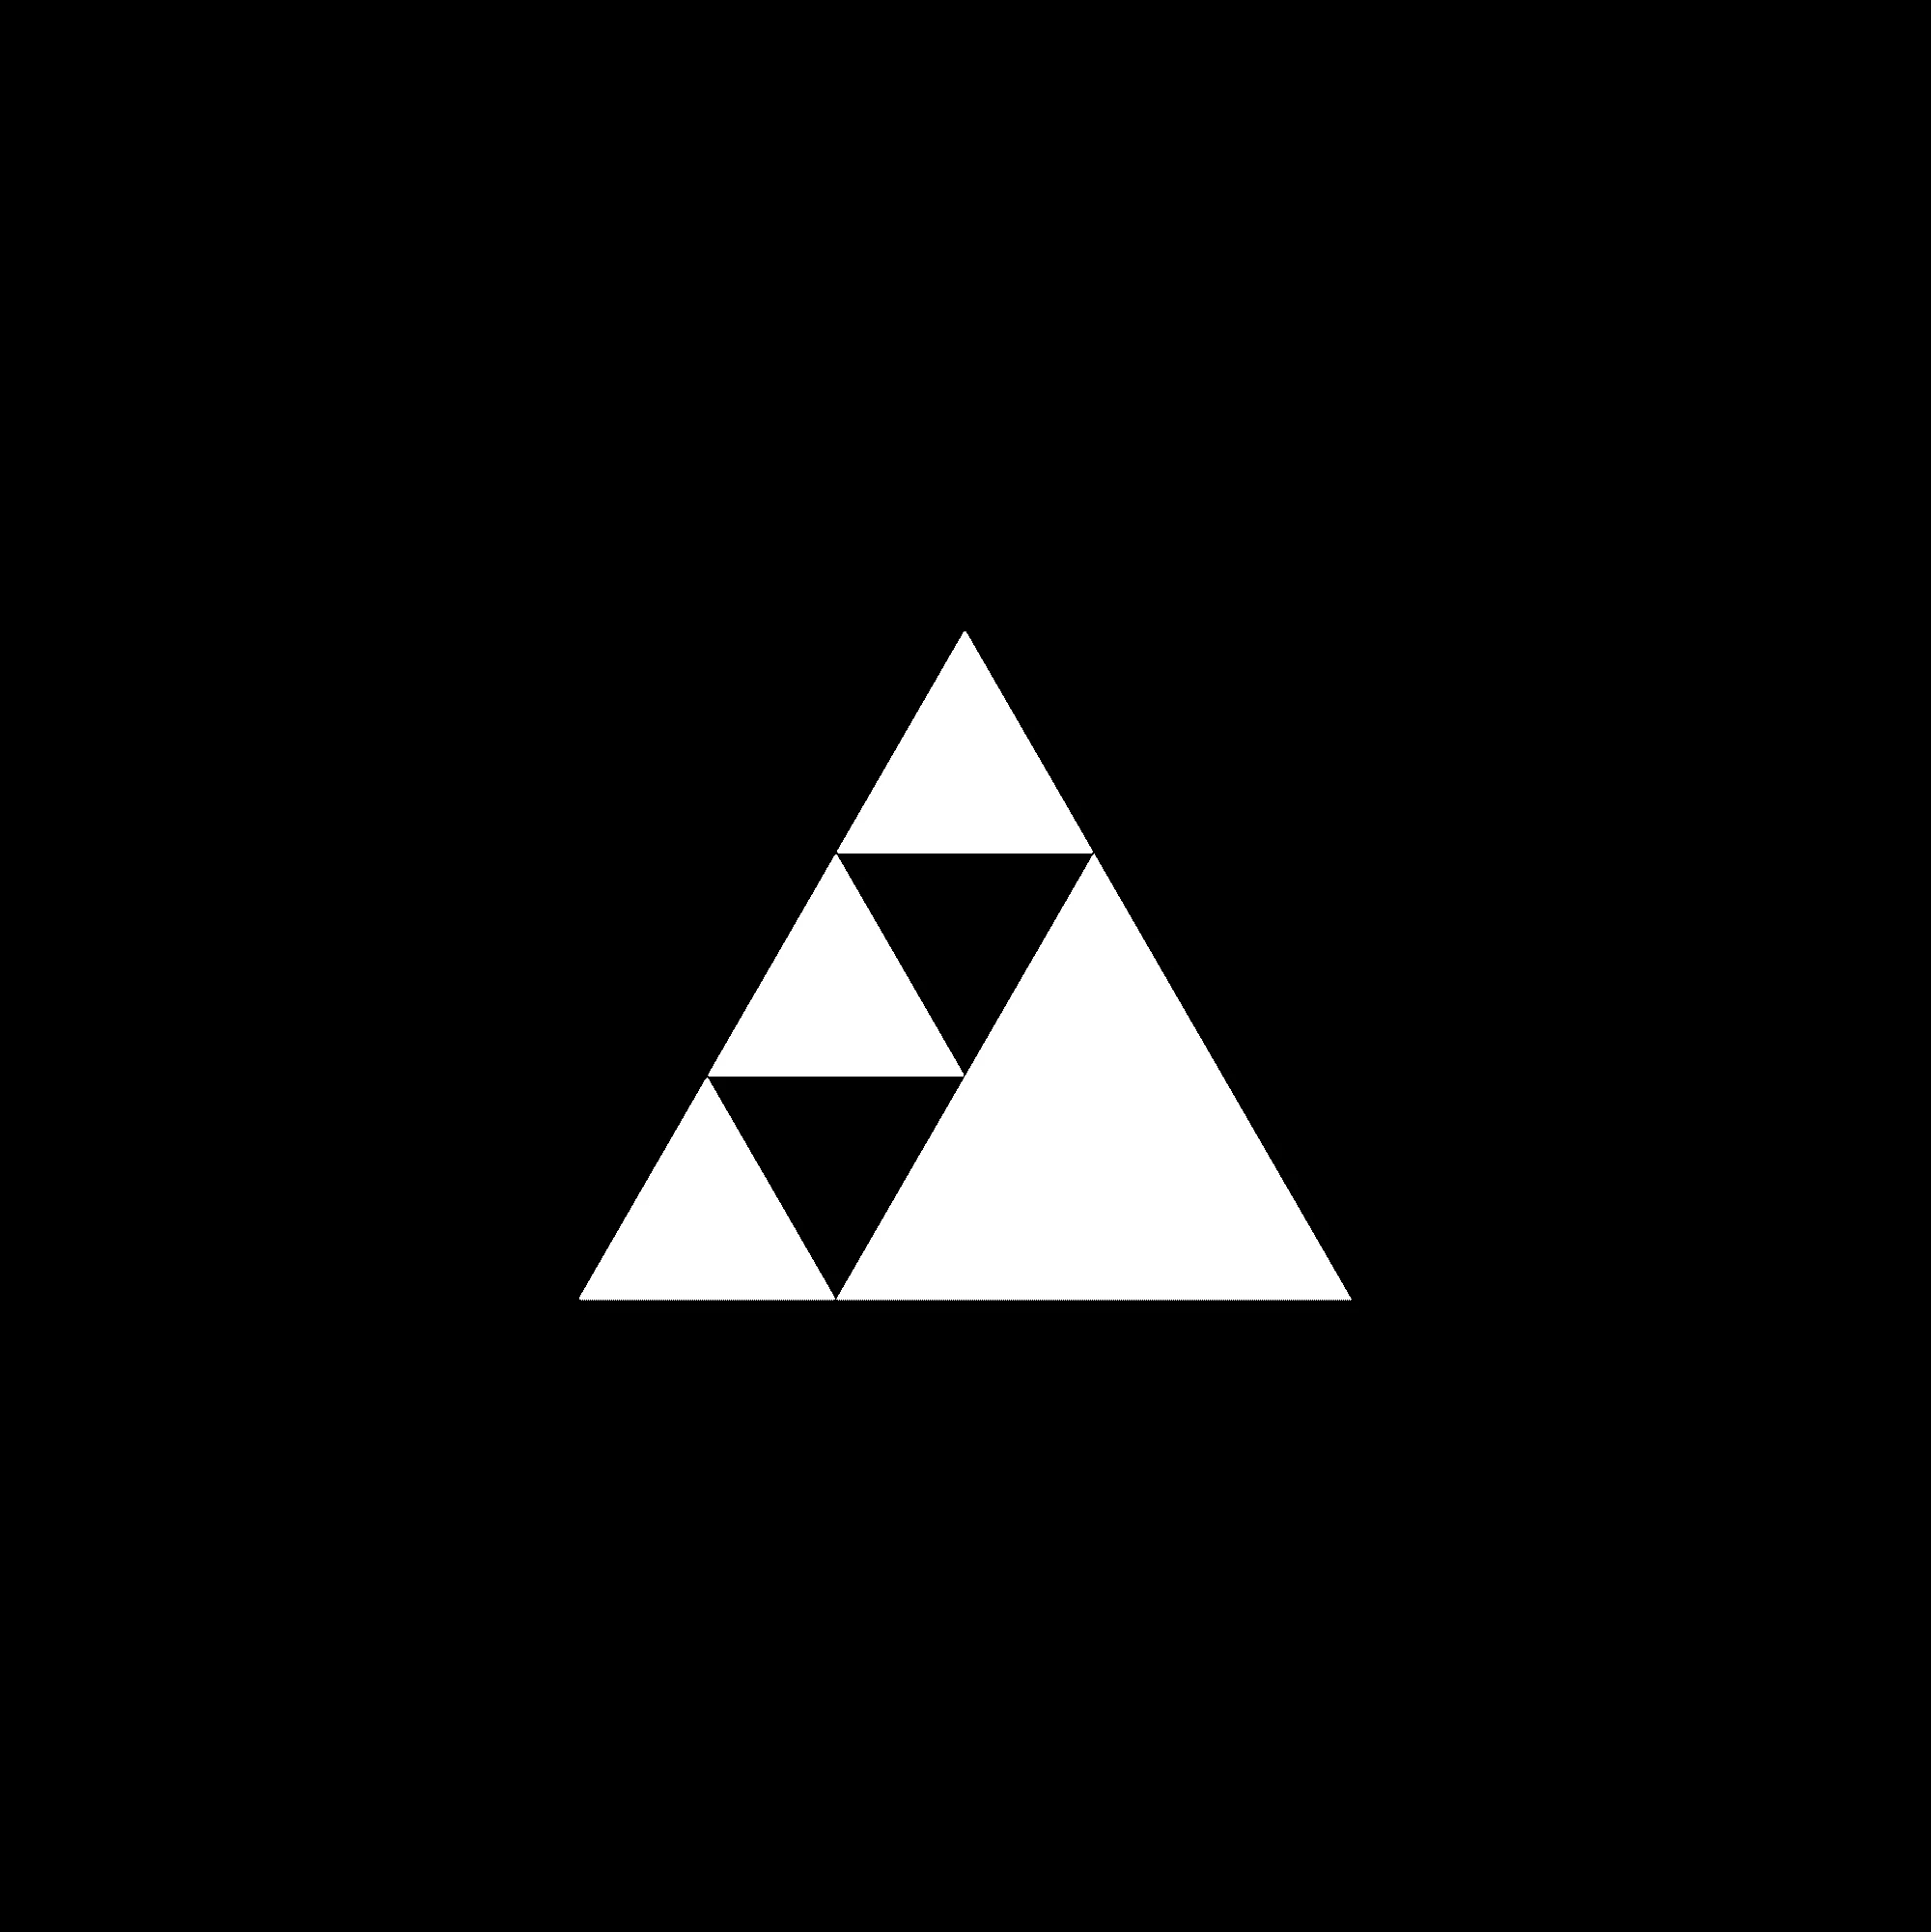 minimalistic black and white logo design, pyramid shaped with triangles